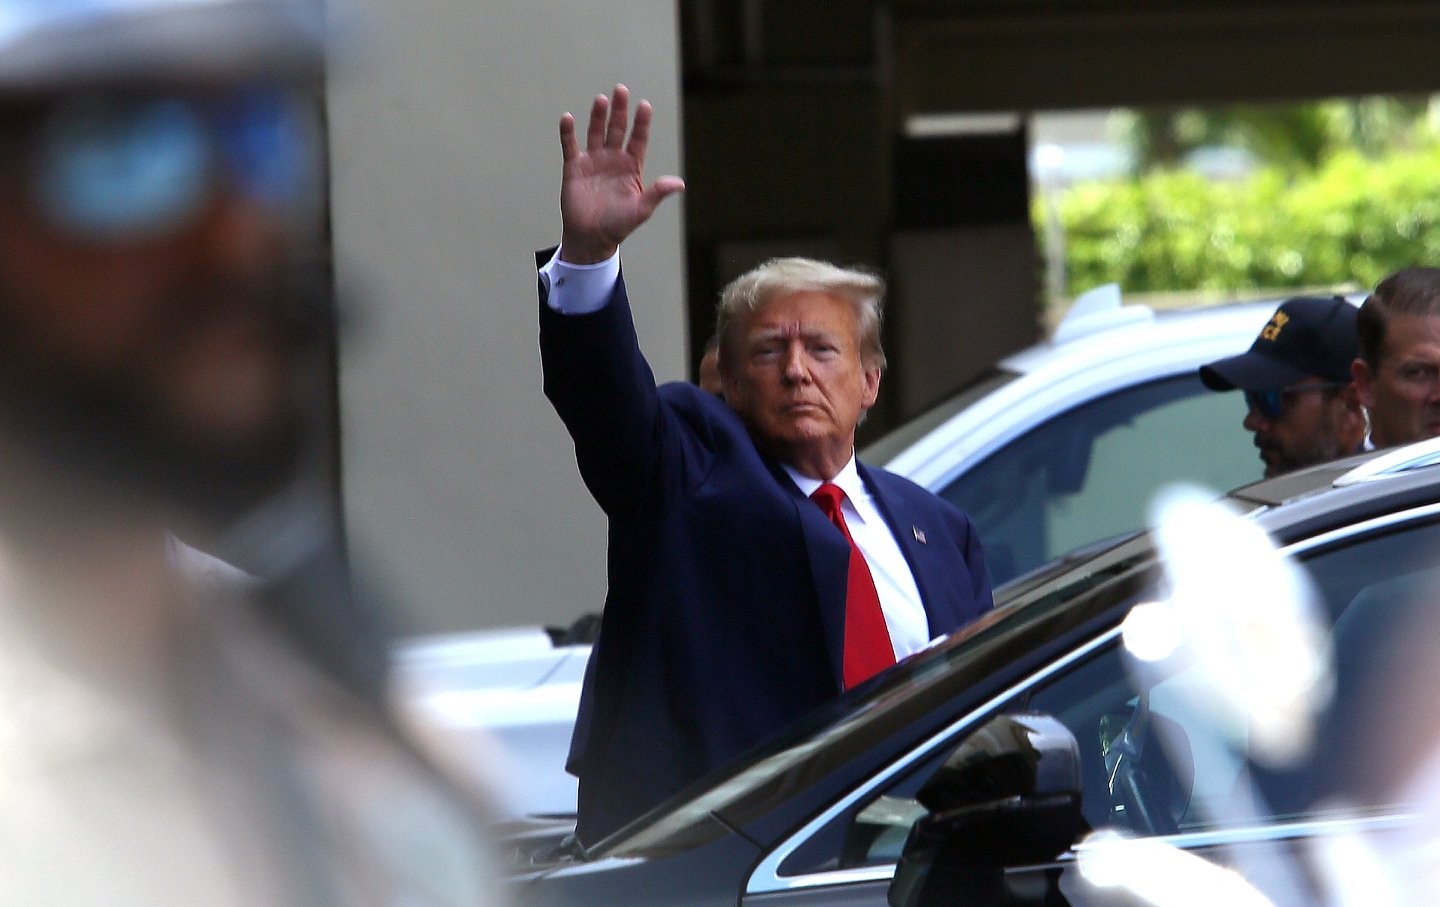 Donald Trump waving while getting into a car.